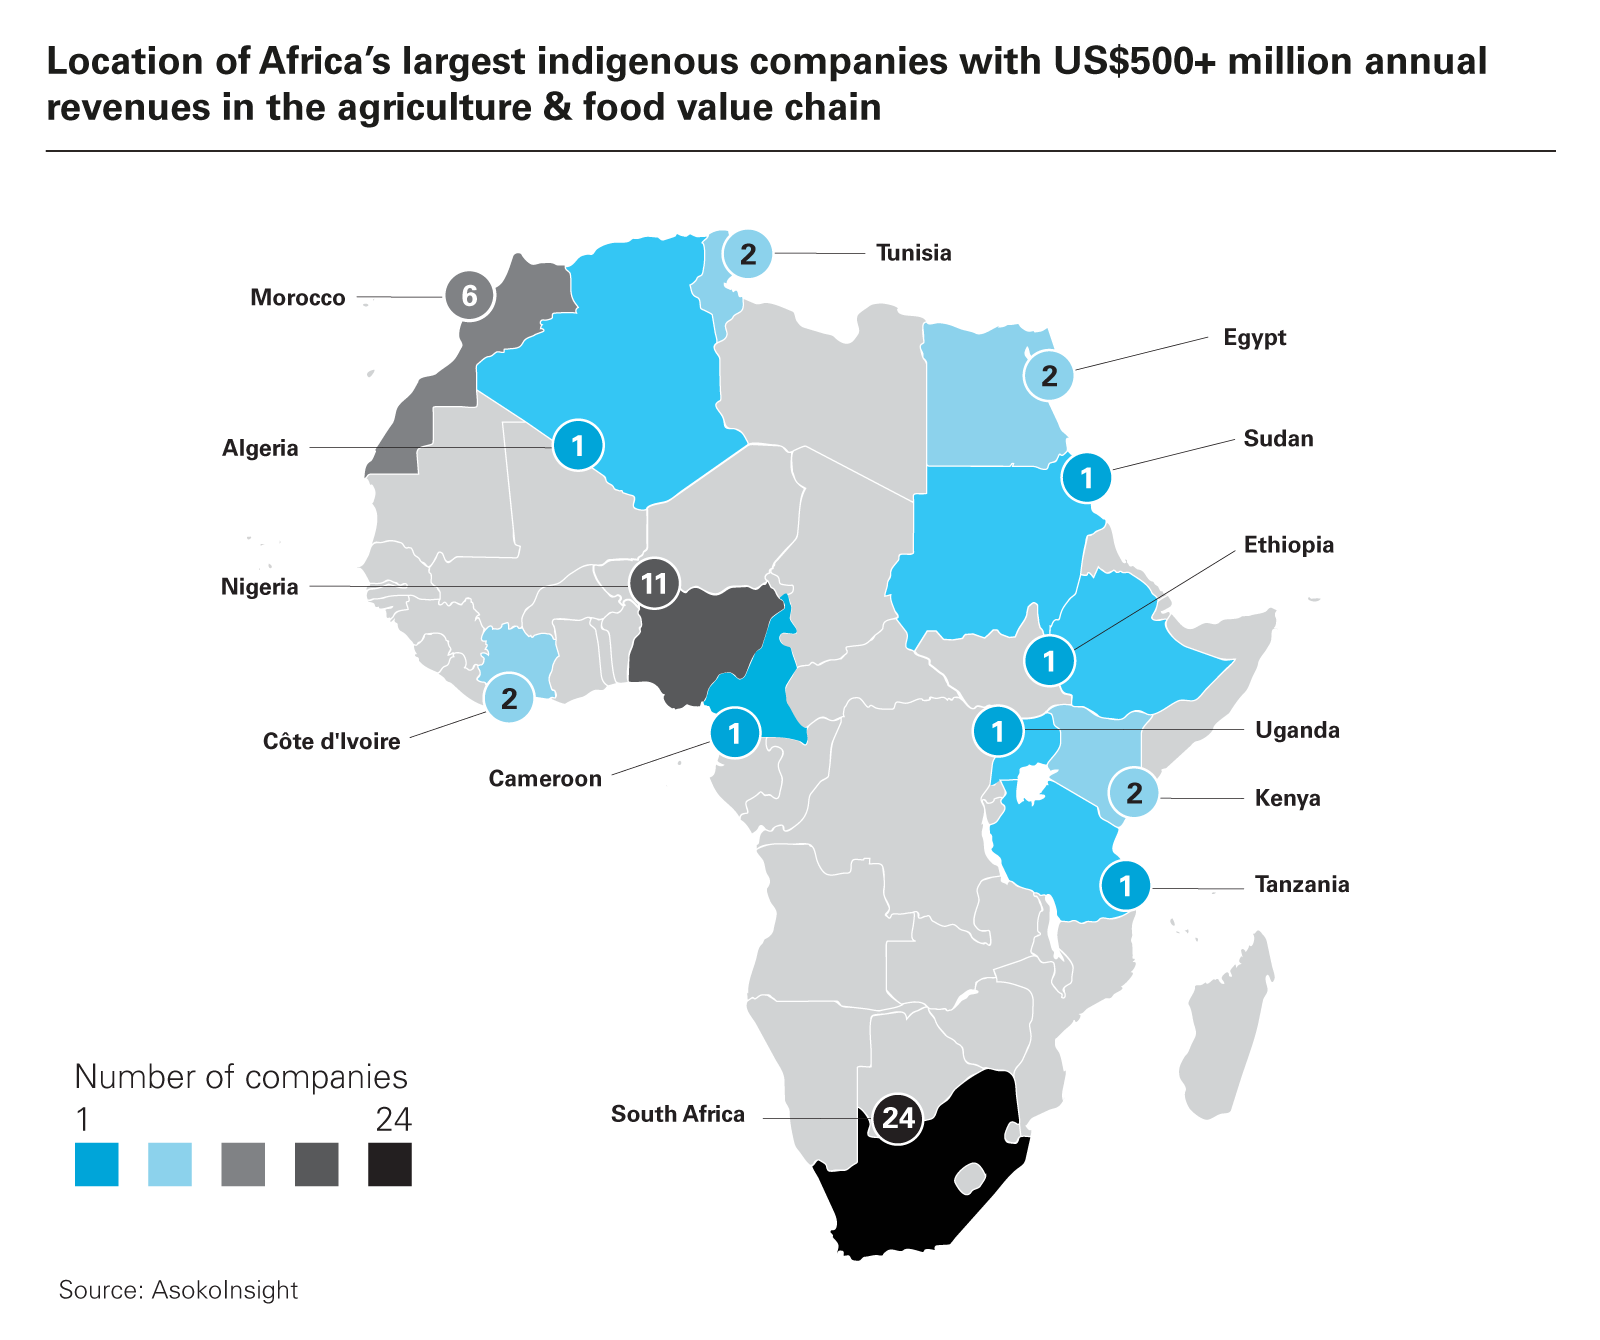 Location of Africa’s largest indigenous companies with US$500+ million annual revenues in the agriculture & food value chain